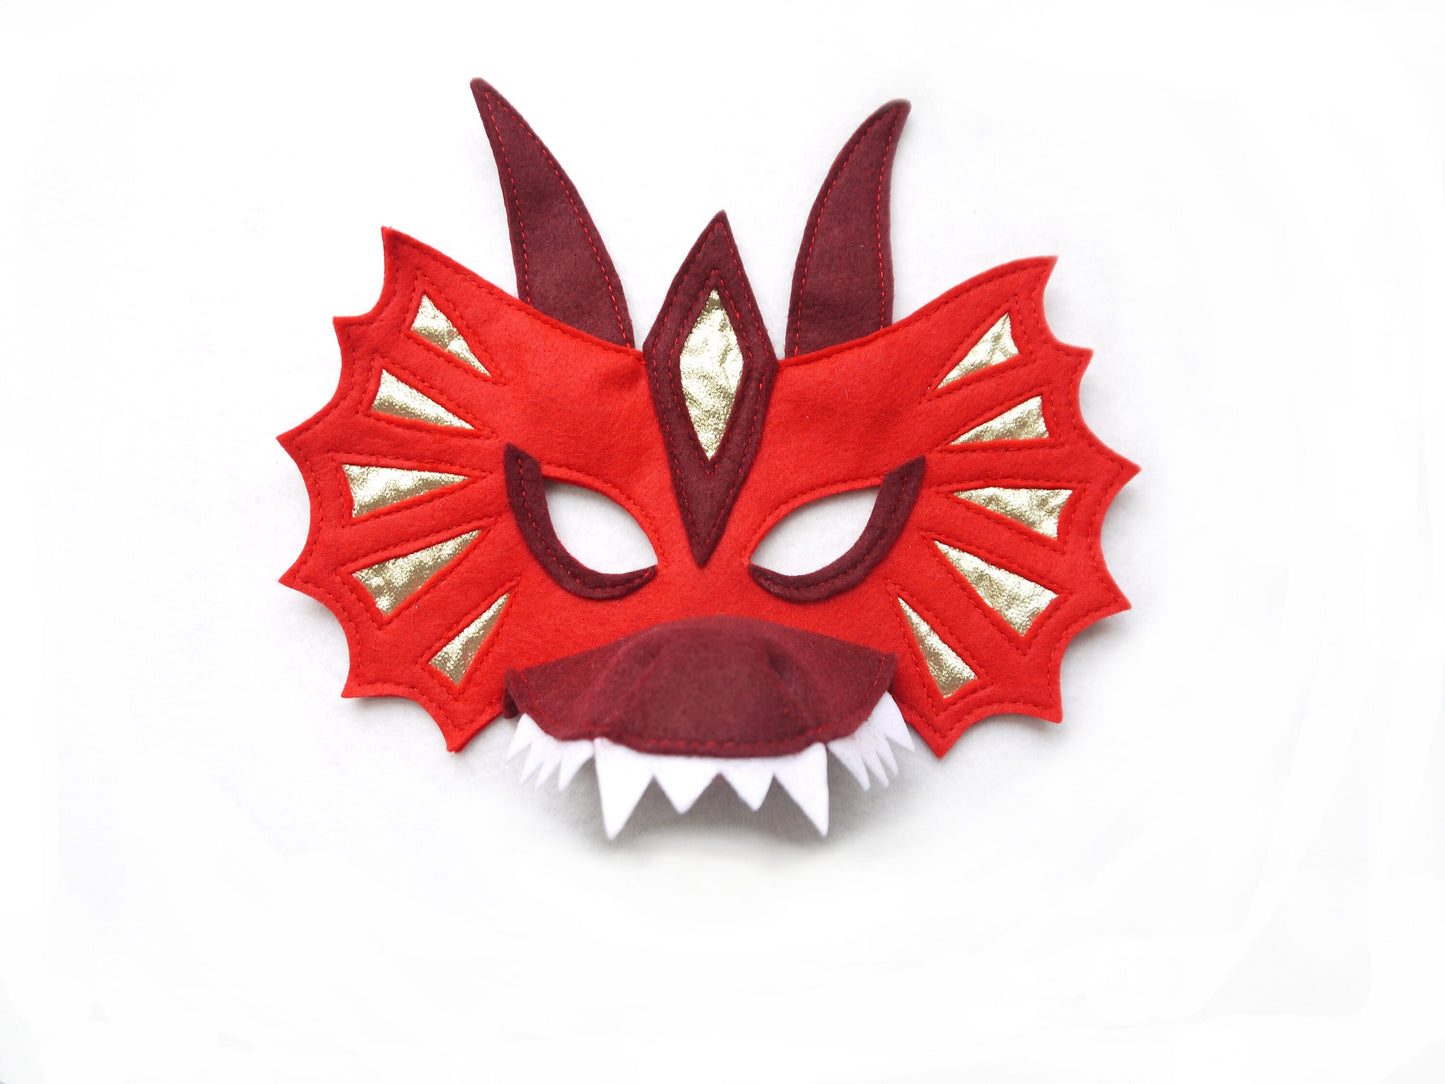 Red Dragon costume wings and mask